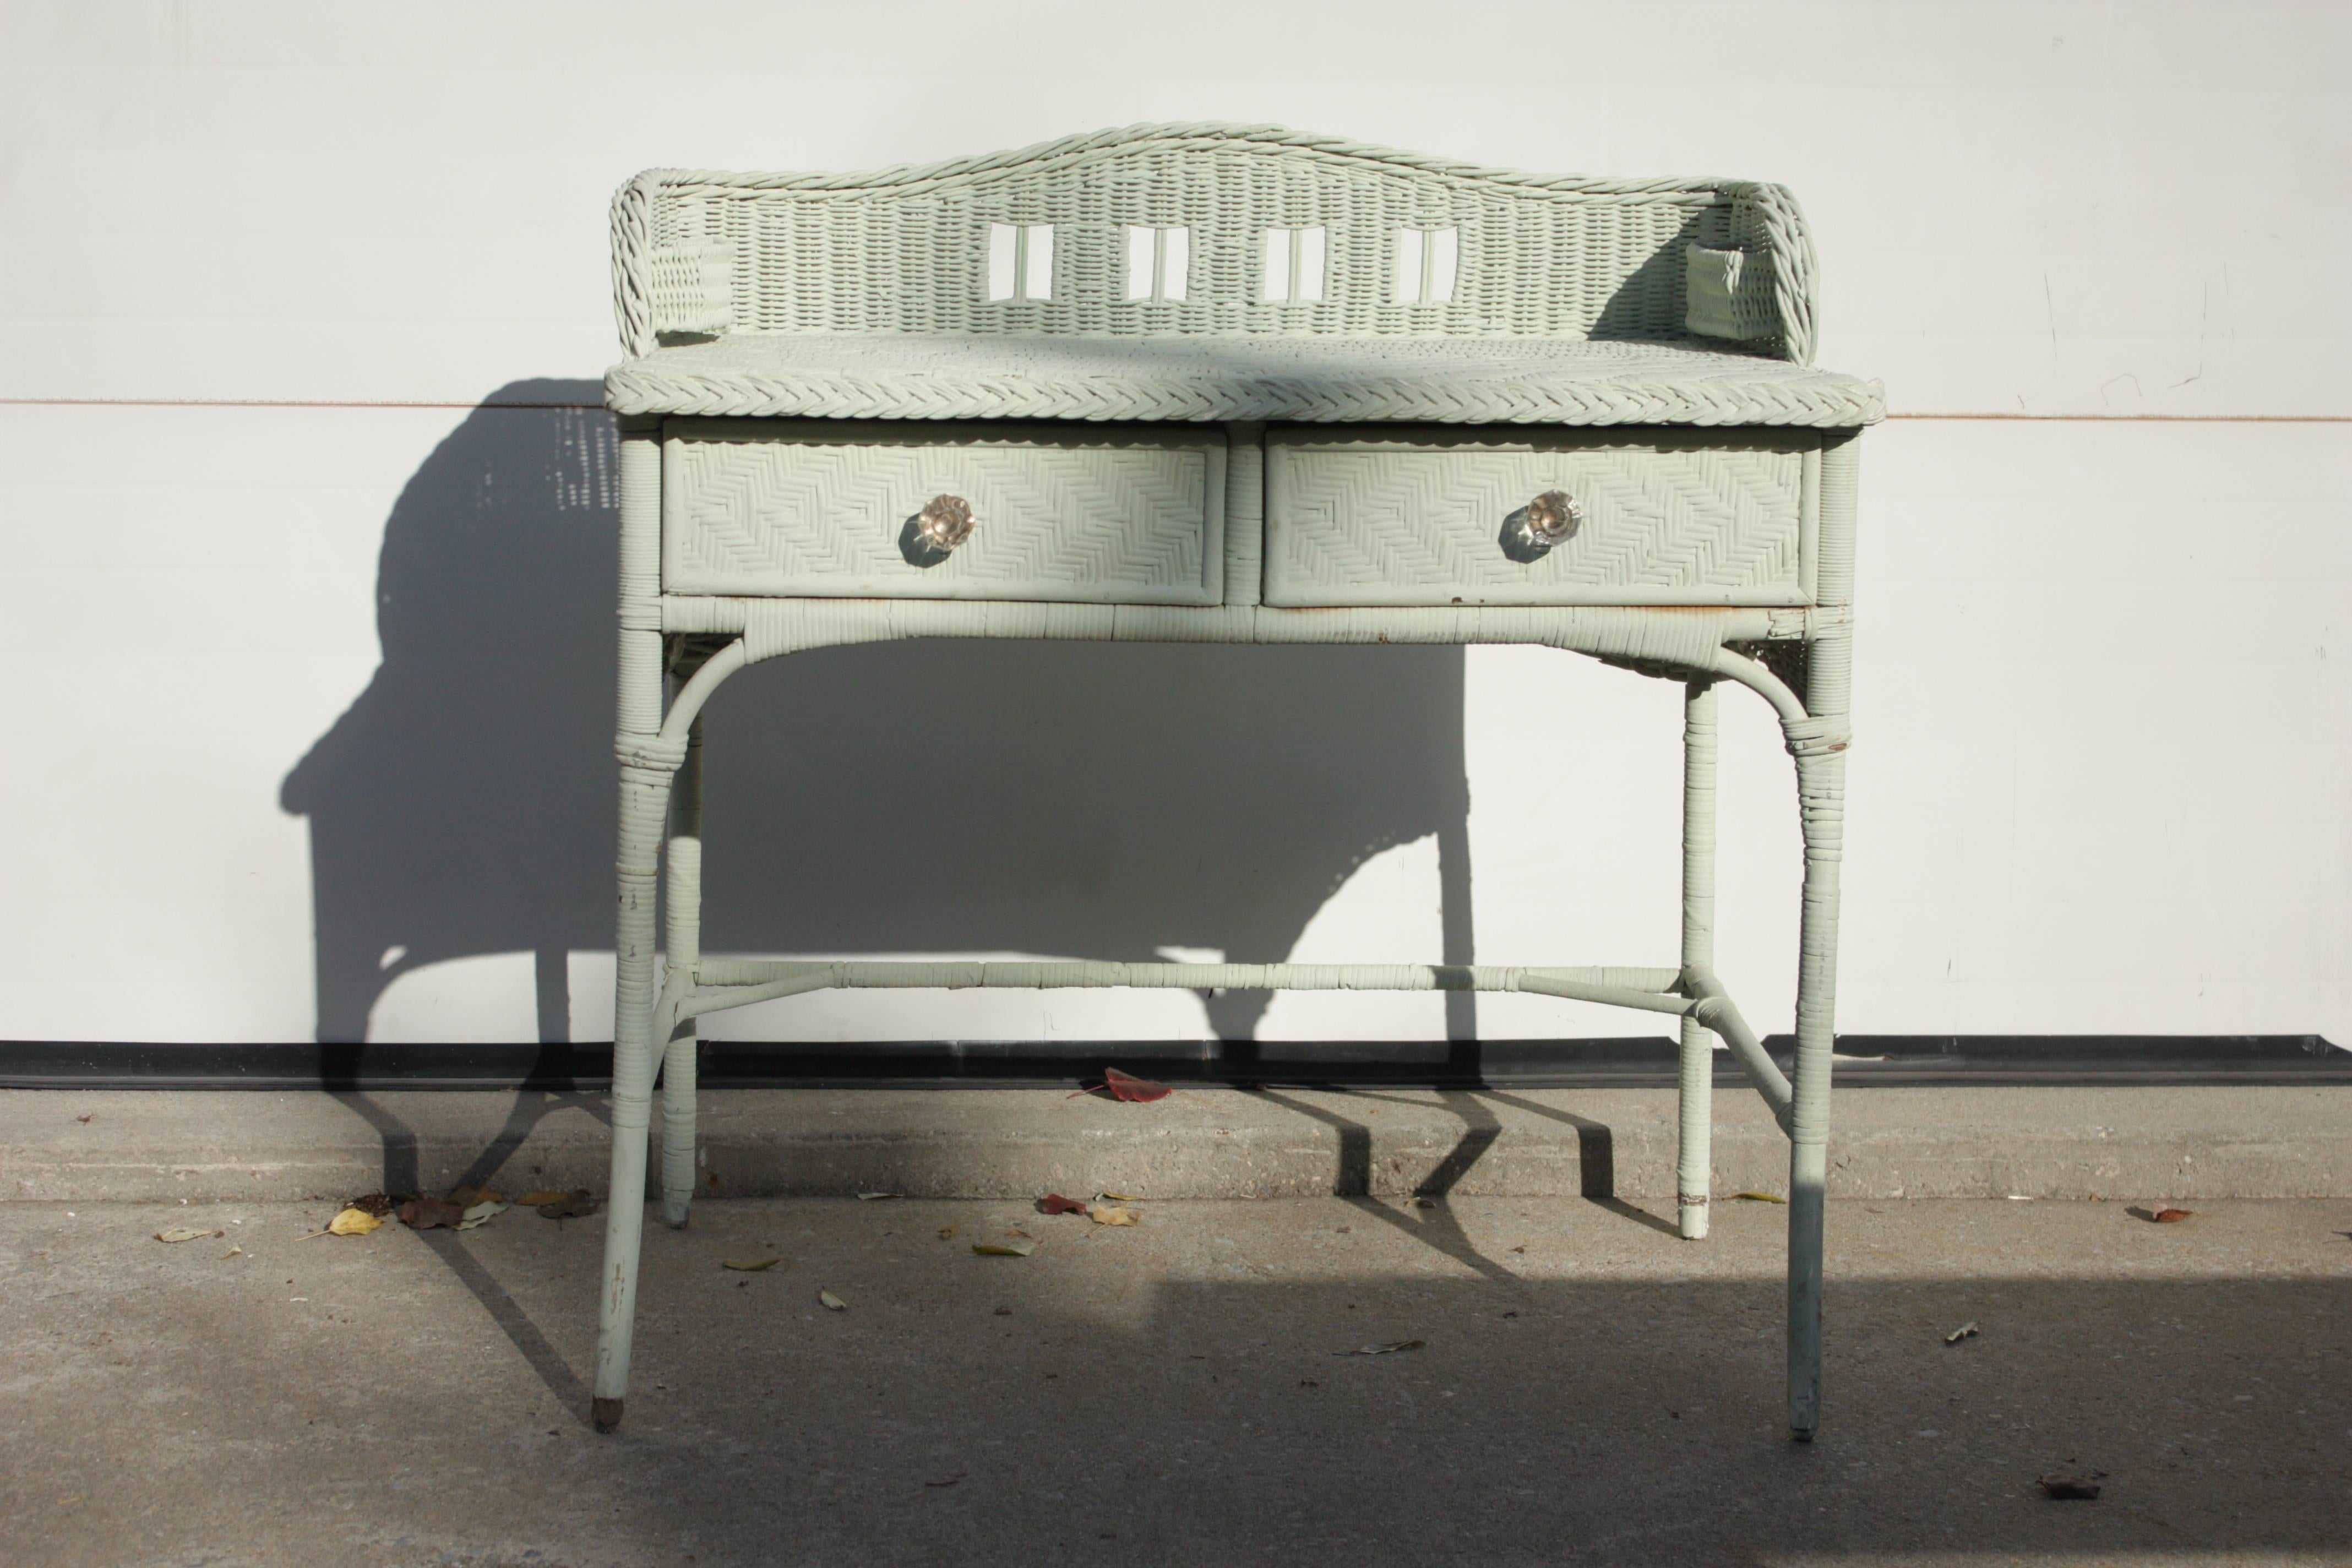 Vintage English Mint Seafoam Painted 1930s Writing Table Desk with two drawers, narrow legs and decorative cross support. Decorative clear pulls, cut-out camelback-style backsplash with functional and decorative single pocket fixed side baskets or